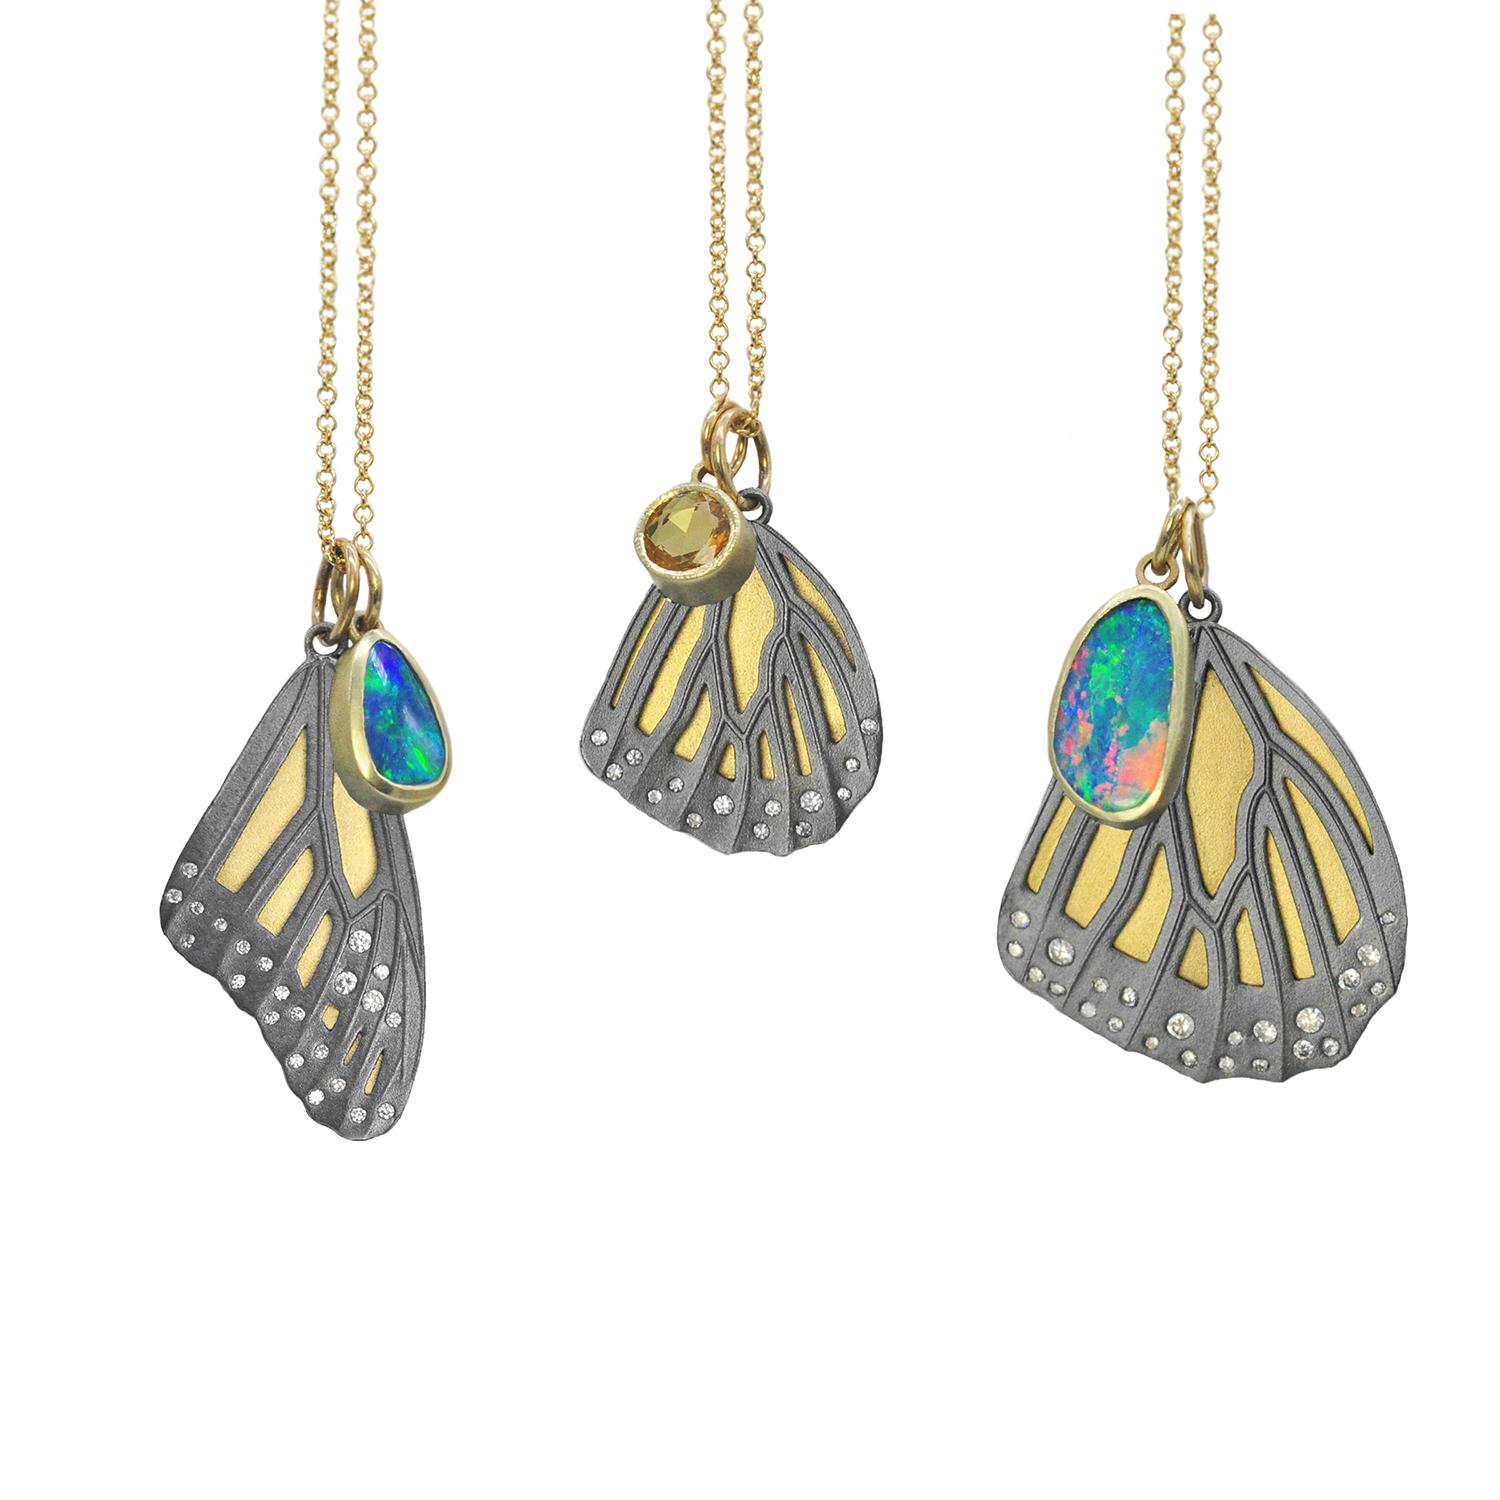 A true Rebecca Myers Design signature piece, our monarch butterfly wing designs are modeled after nature's masterpiece and hand crafted with the highest quality materials. Oxidized sterling silver is layered over 18k yellow gold, with sparkling